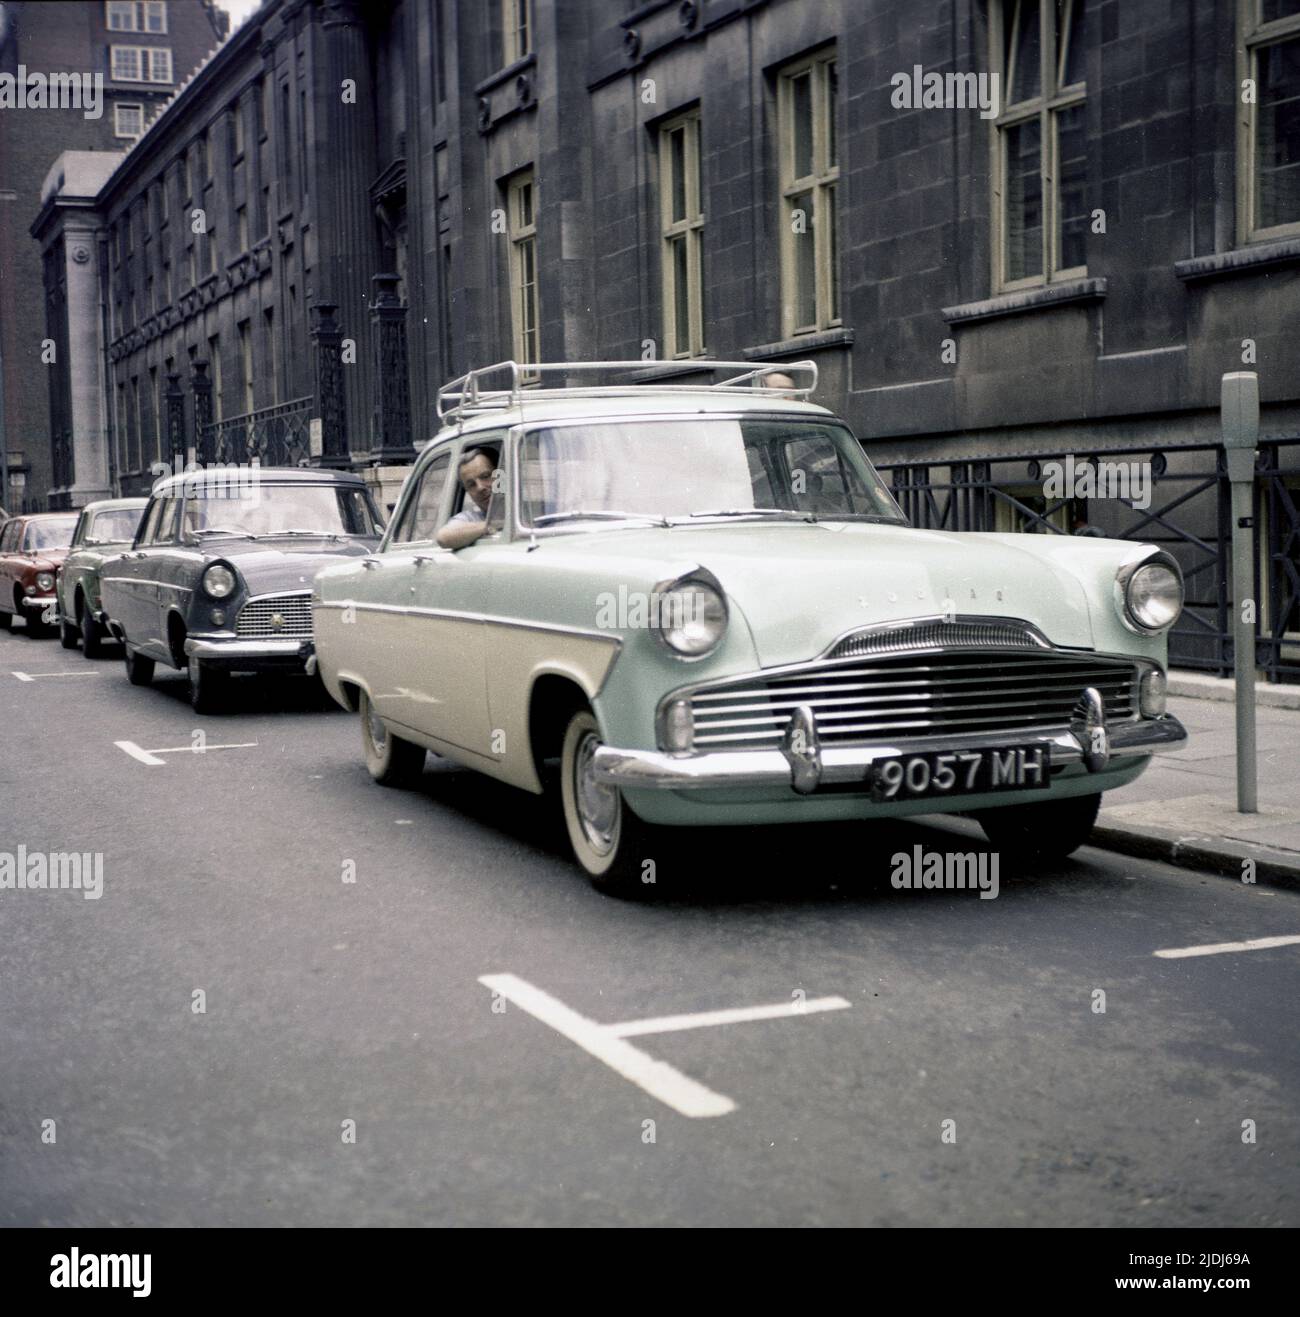 1964, historical, a man sitting in his car of the era, a tone-tone, British Ford Zodiac, parked in a street, England, UK. Stock Photo